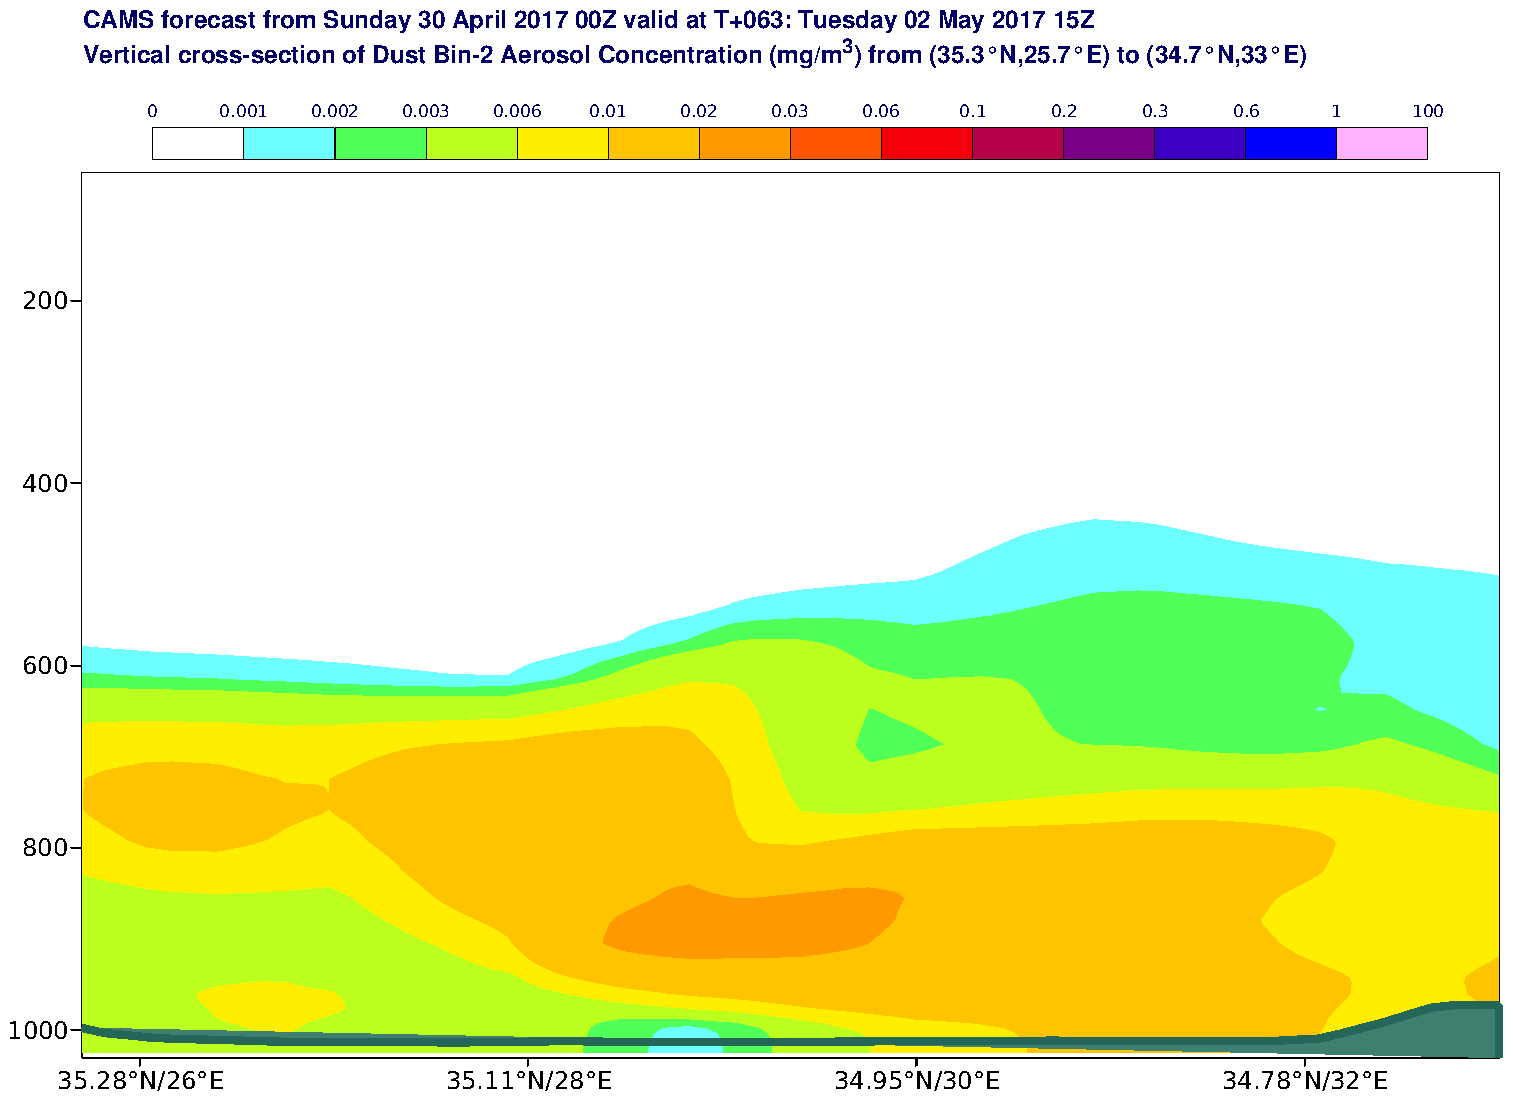 Vertical cross-section of Dust Bin-2 Aerosol Concentration (mg/m3) valid at T63 - 2017-05-02 15:00